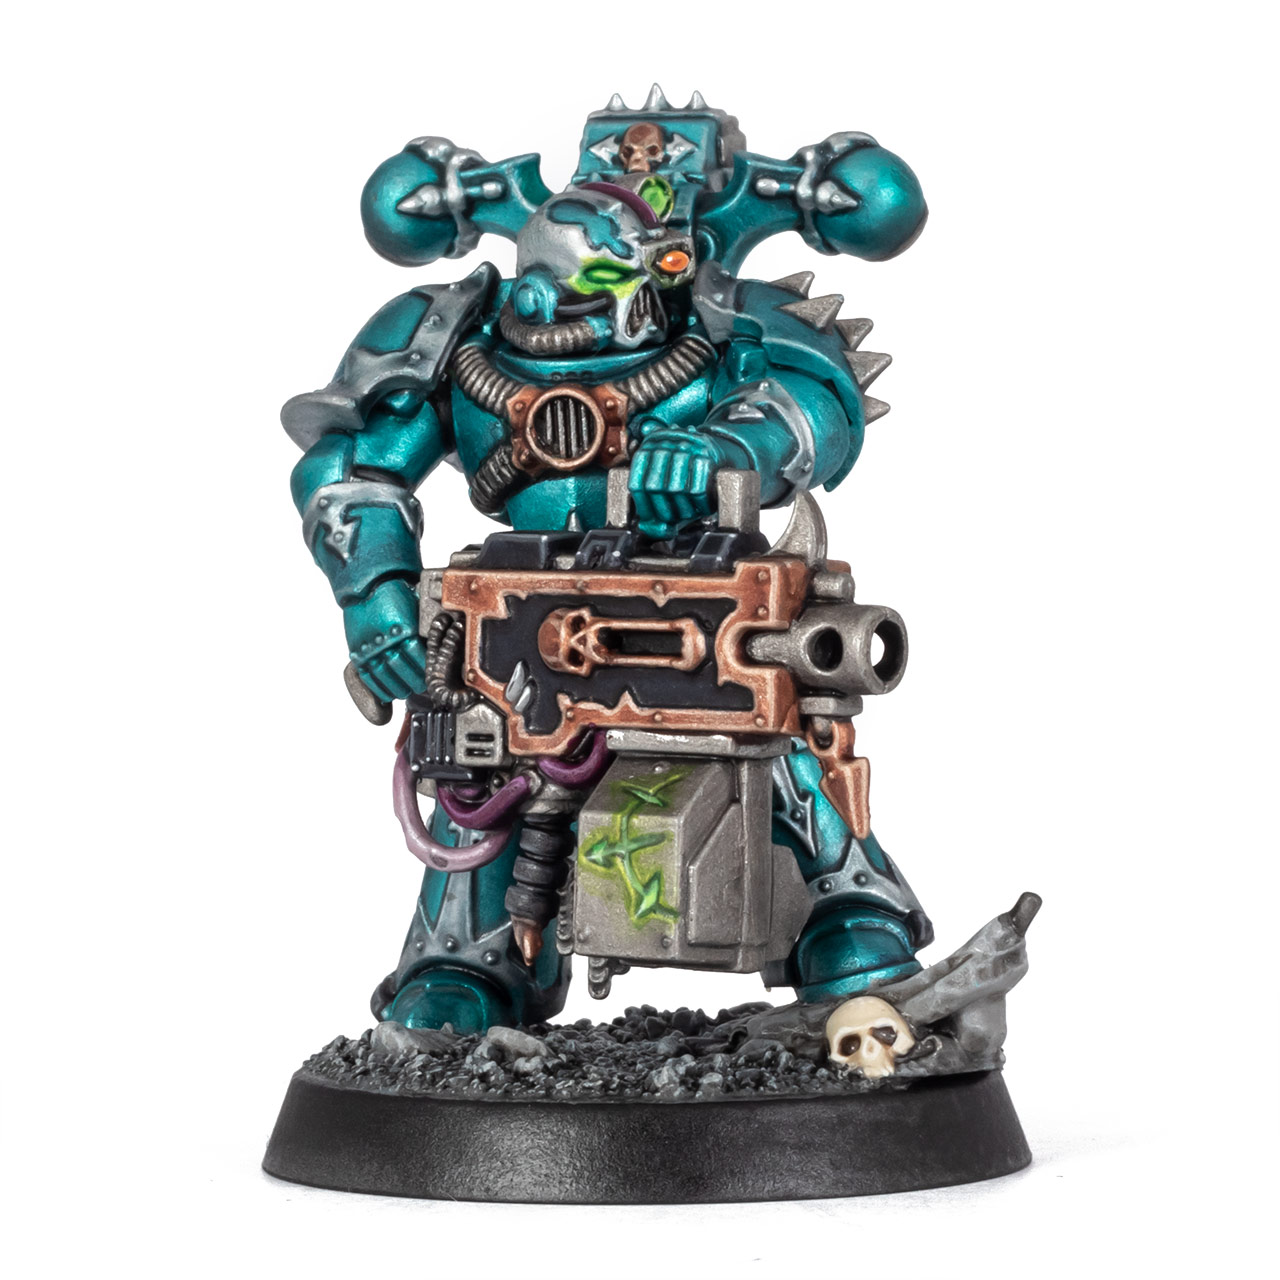 Alpha Legion Chaos Space Marine Legionary Heavy Gunner with Heavy Bolter painted by Stahly